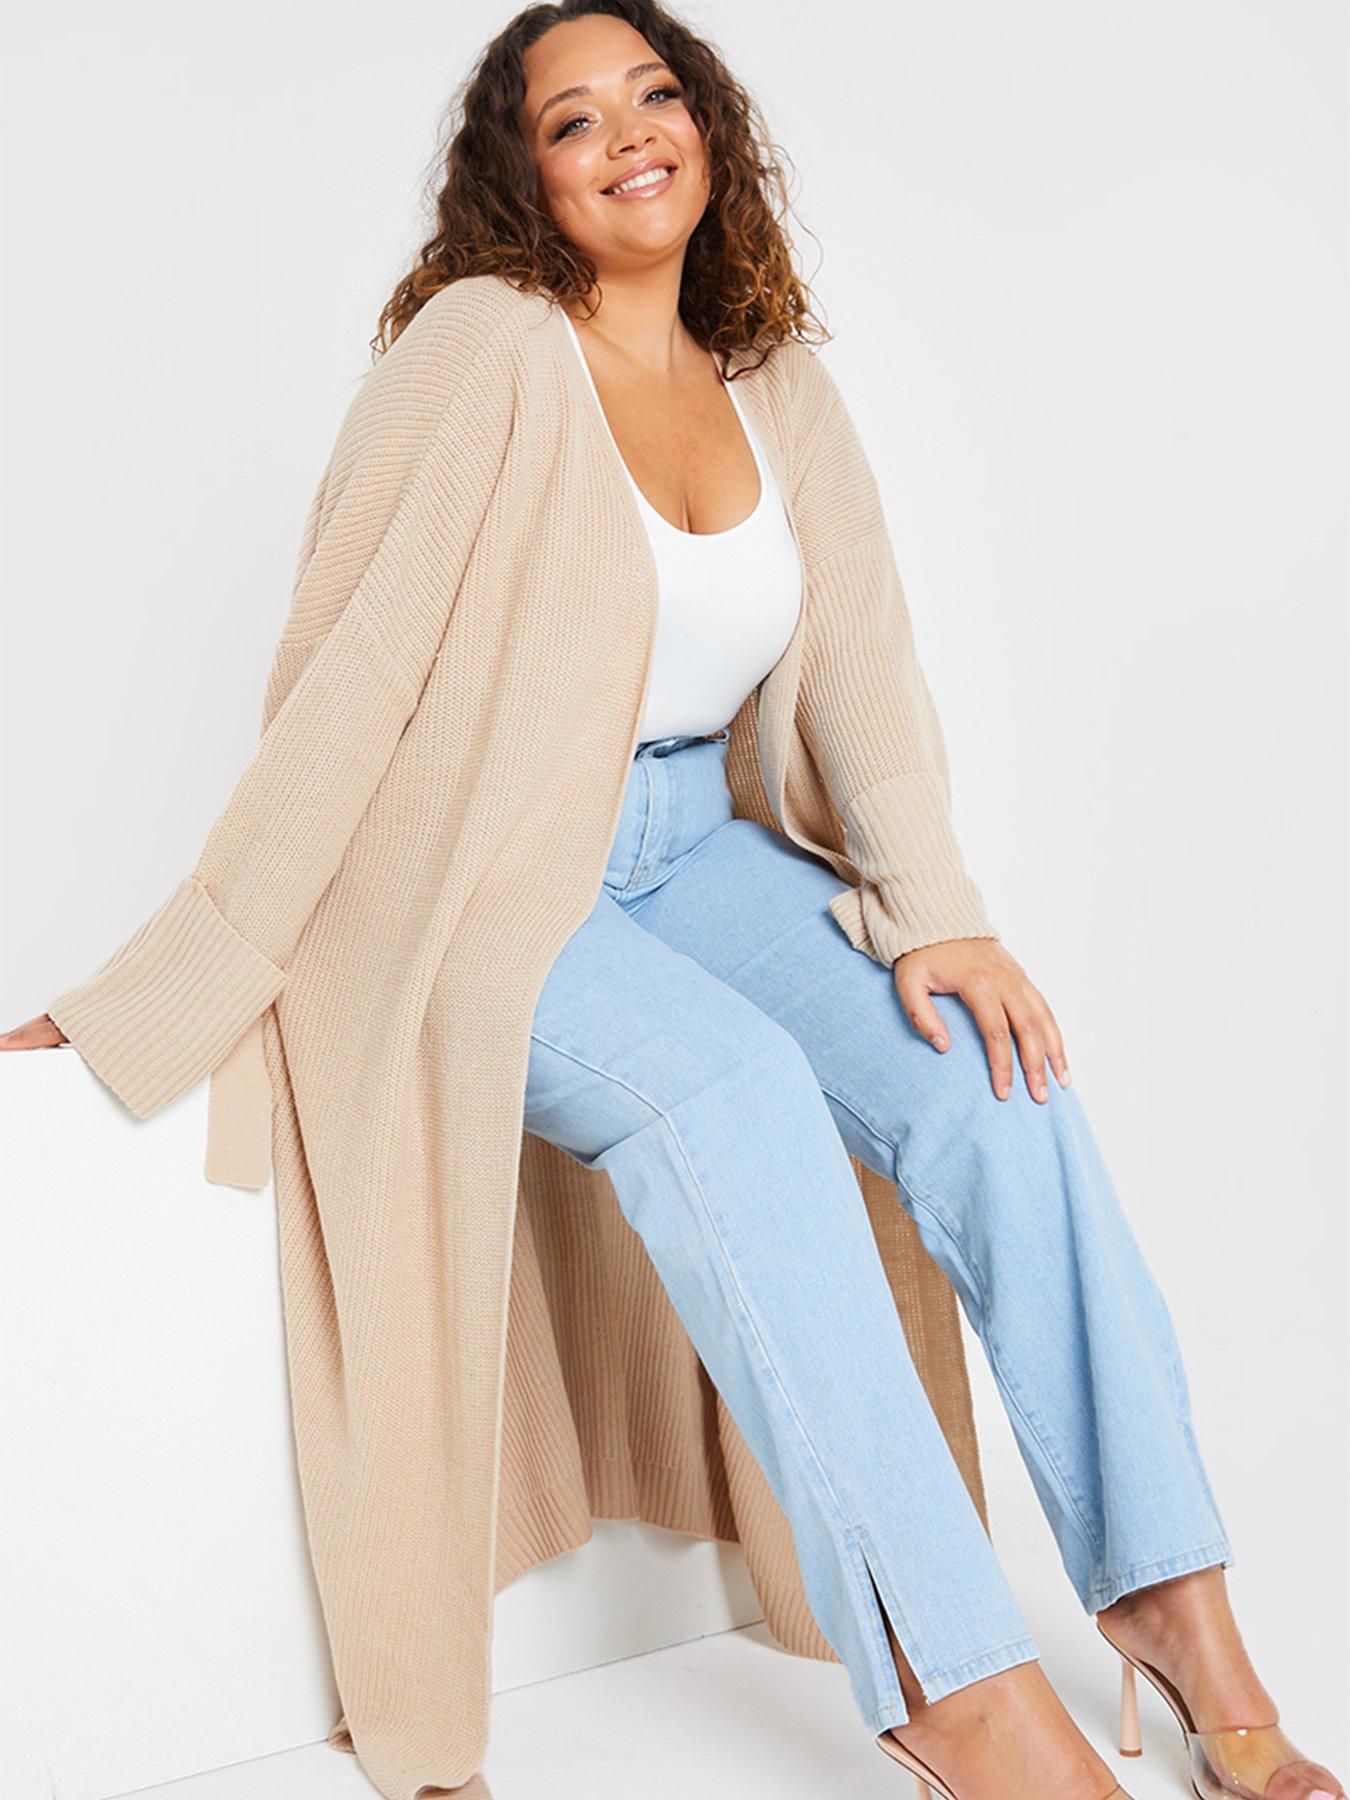  In The Style Curve X Billie Faiers Long Line Turn Back Cuff Cardigan - Stone